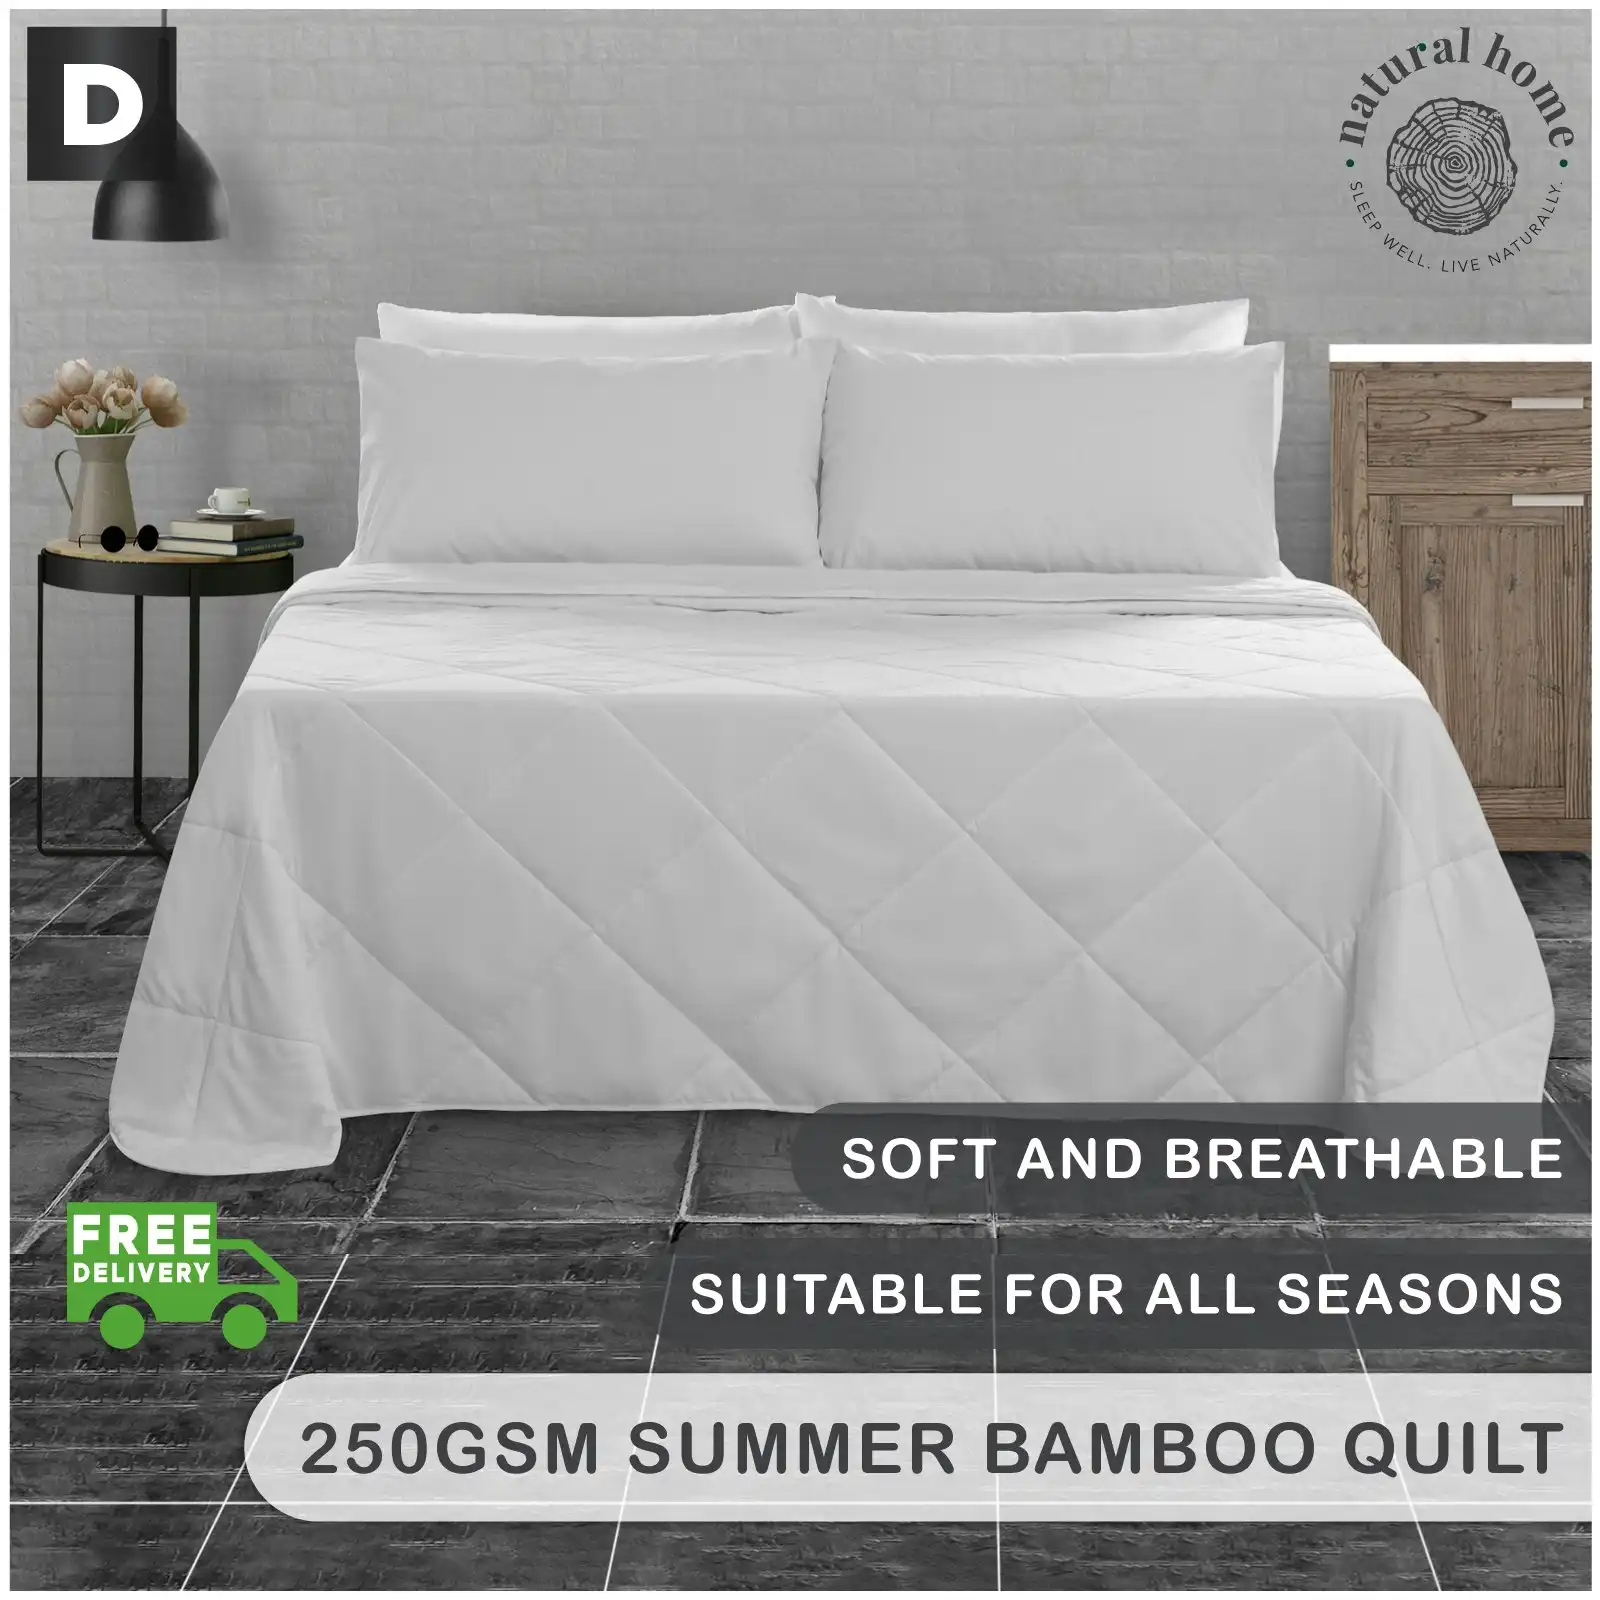 Natural Home Summer Bamboo Quilt 250gsm - White - Double Bed